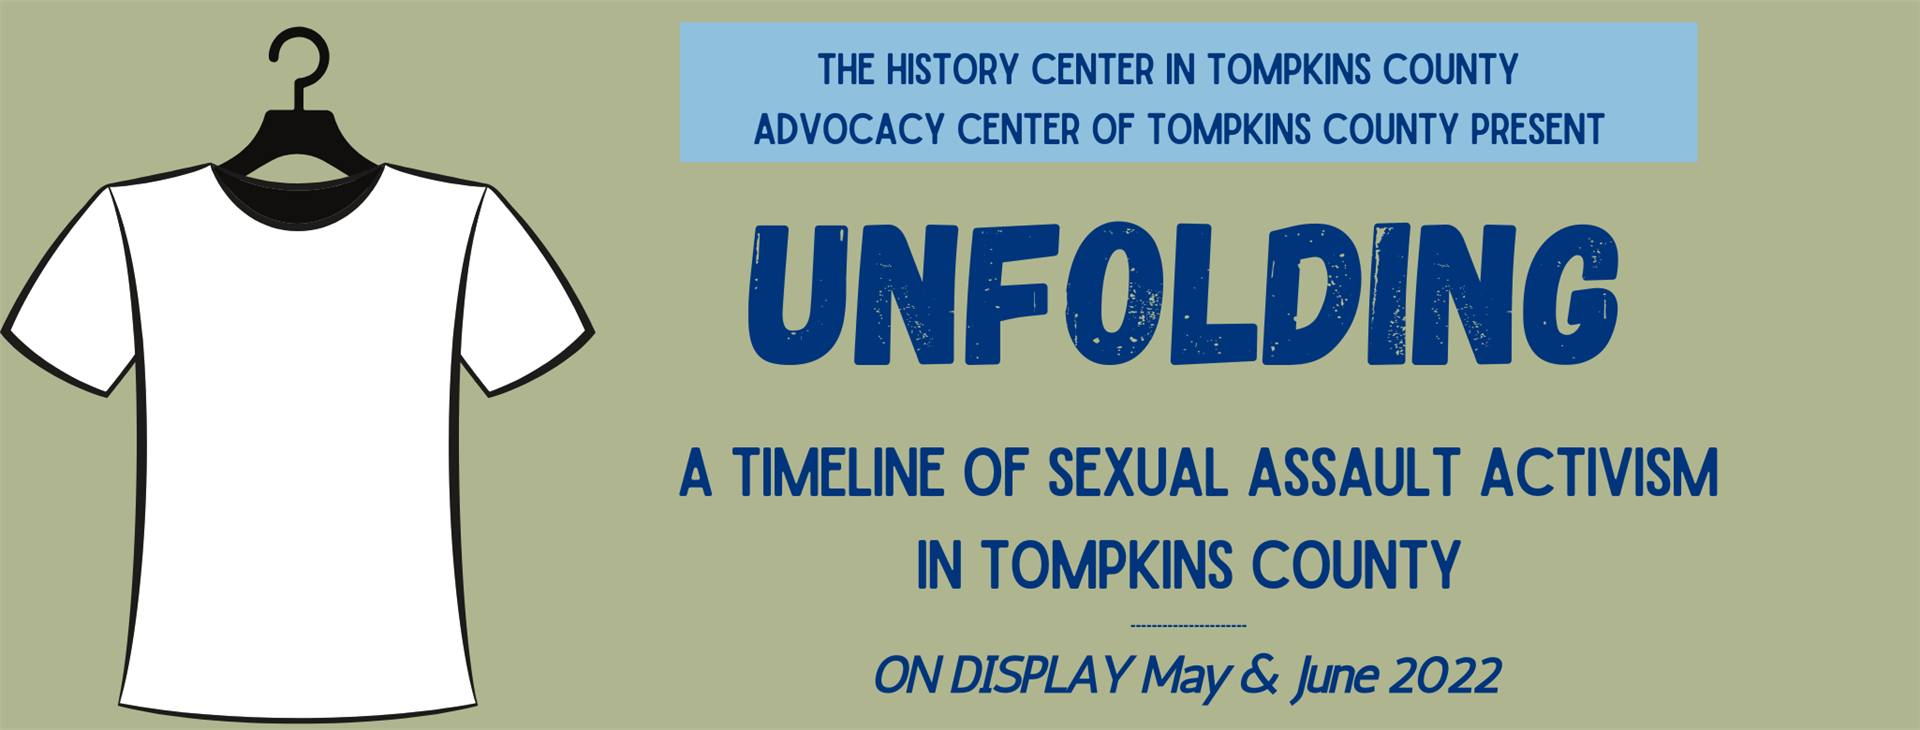 Rectangular area with green background. There is a white shirt on a hanger on the left. There is a blue rectangle on the top that reads “The History Center in Tompkins County Advocacy Center of Tompkins County present”. The rest reads “Unfolding a Timeline of Sexual Assault Activism in Tompkins County, on display May and June 2022”.